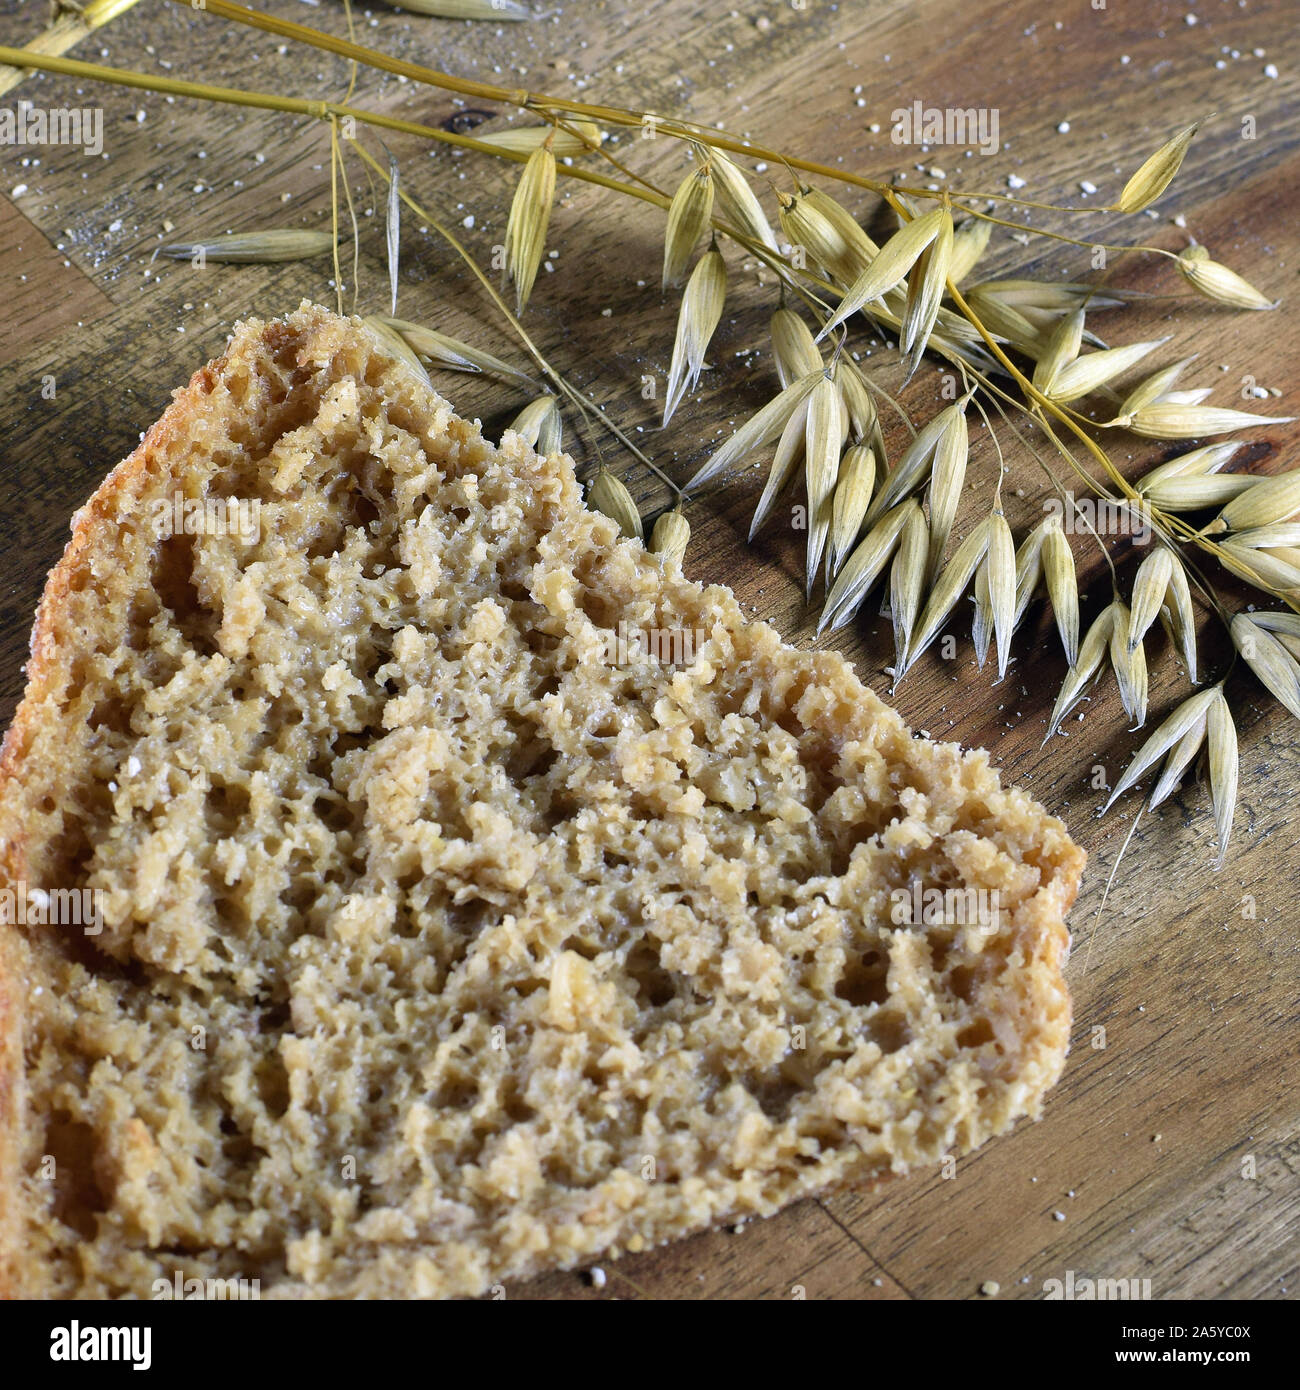 Top view of oat bread. Oat ears of grain on brown wooden table. Close up square shape image. Stock Photo